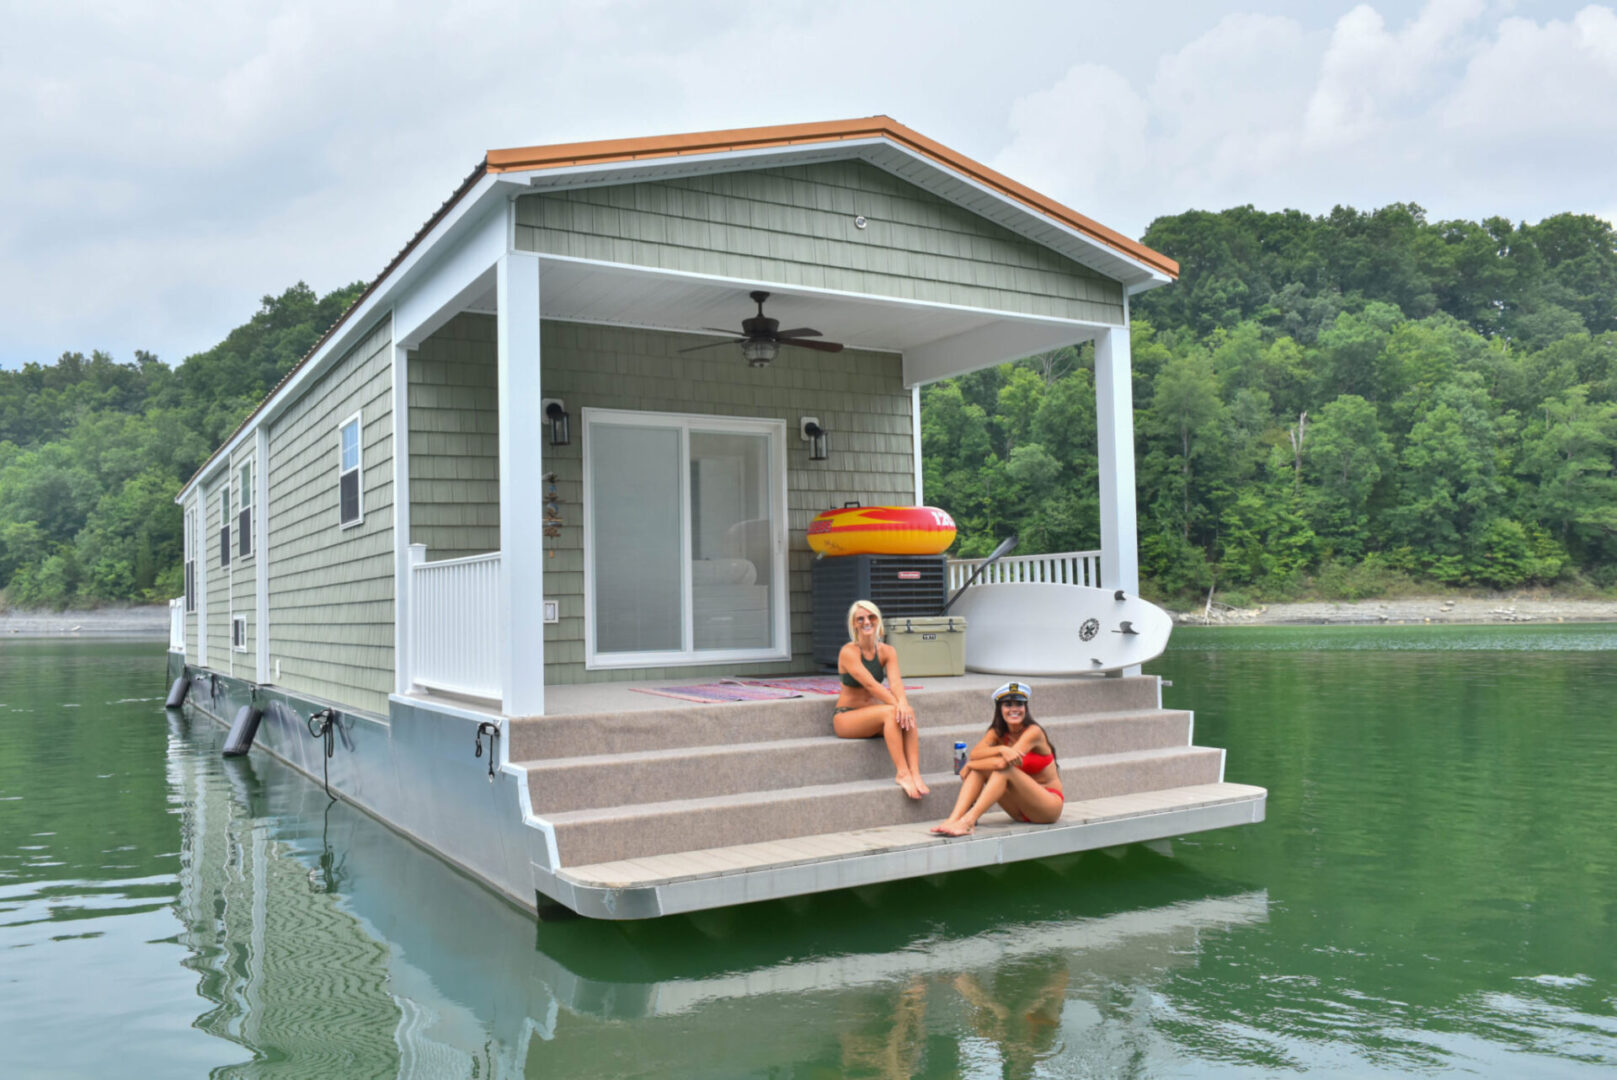 Two women in swimsuits relaxing in the stair steps of the houseboat’s stern area